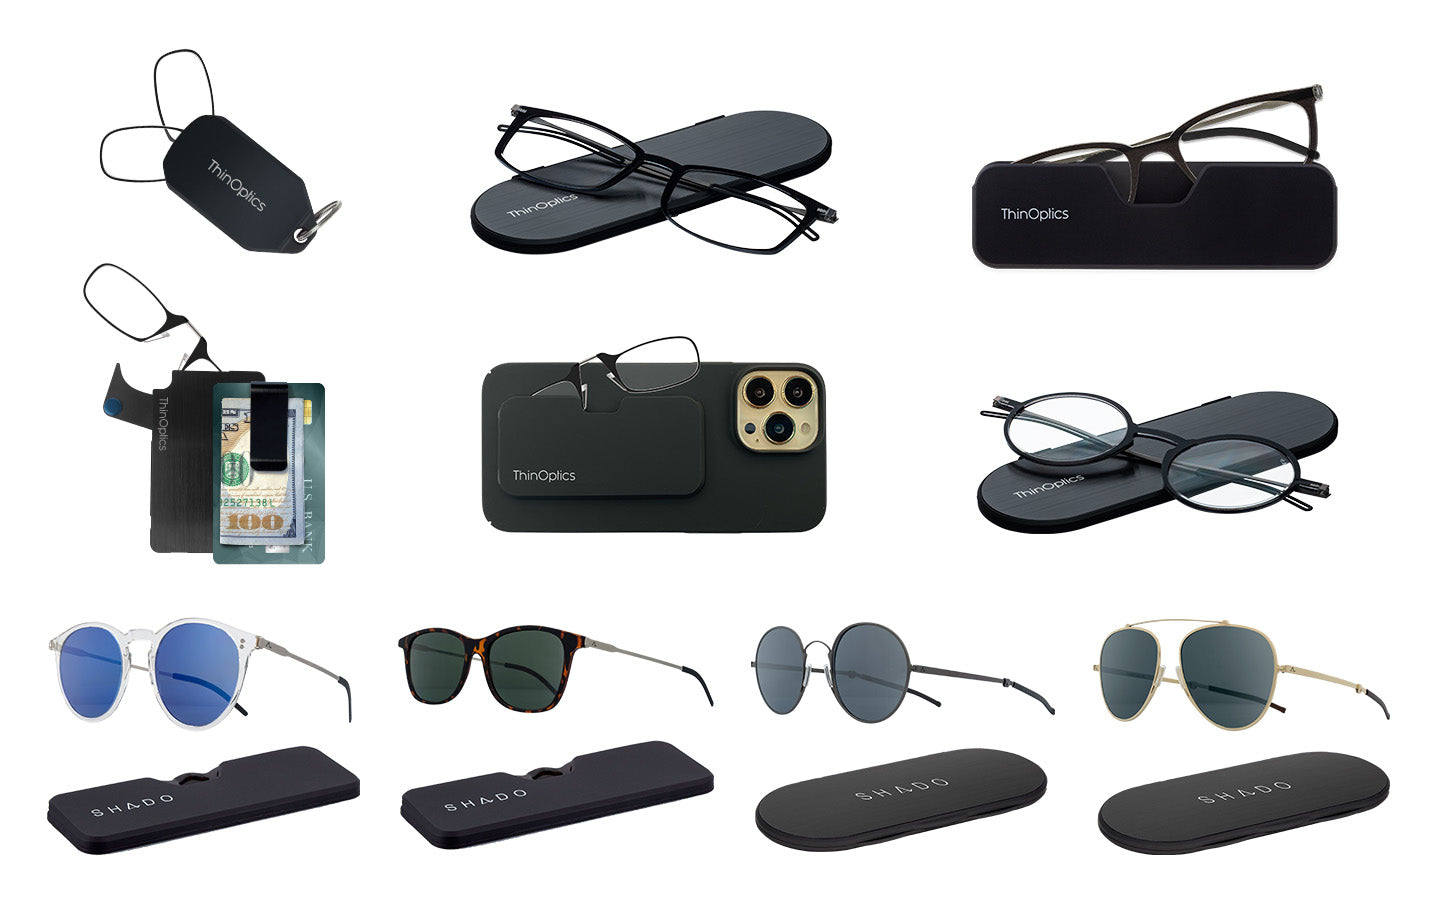 ThinOptics products - Keychain, Full Frame Brooklyn Reading Glasses, Full Frame Connect Reading Glasses, Full Frame Manhattan Reading Glasses, Wallet, Phone Case, Palo Alto Sunglasses, Mountain View Sunglasses, Los Altos Sunglasses, Menlo Park Sunglasses